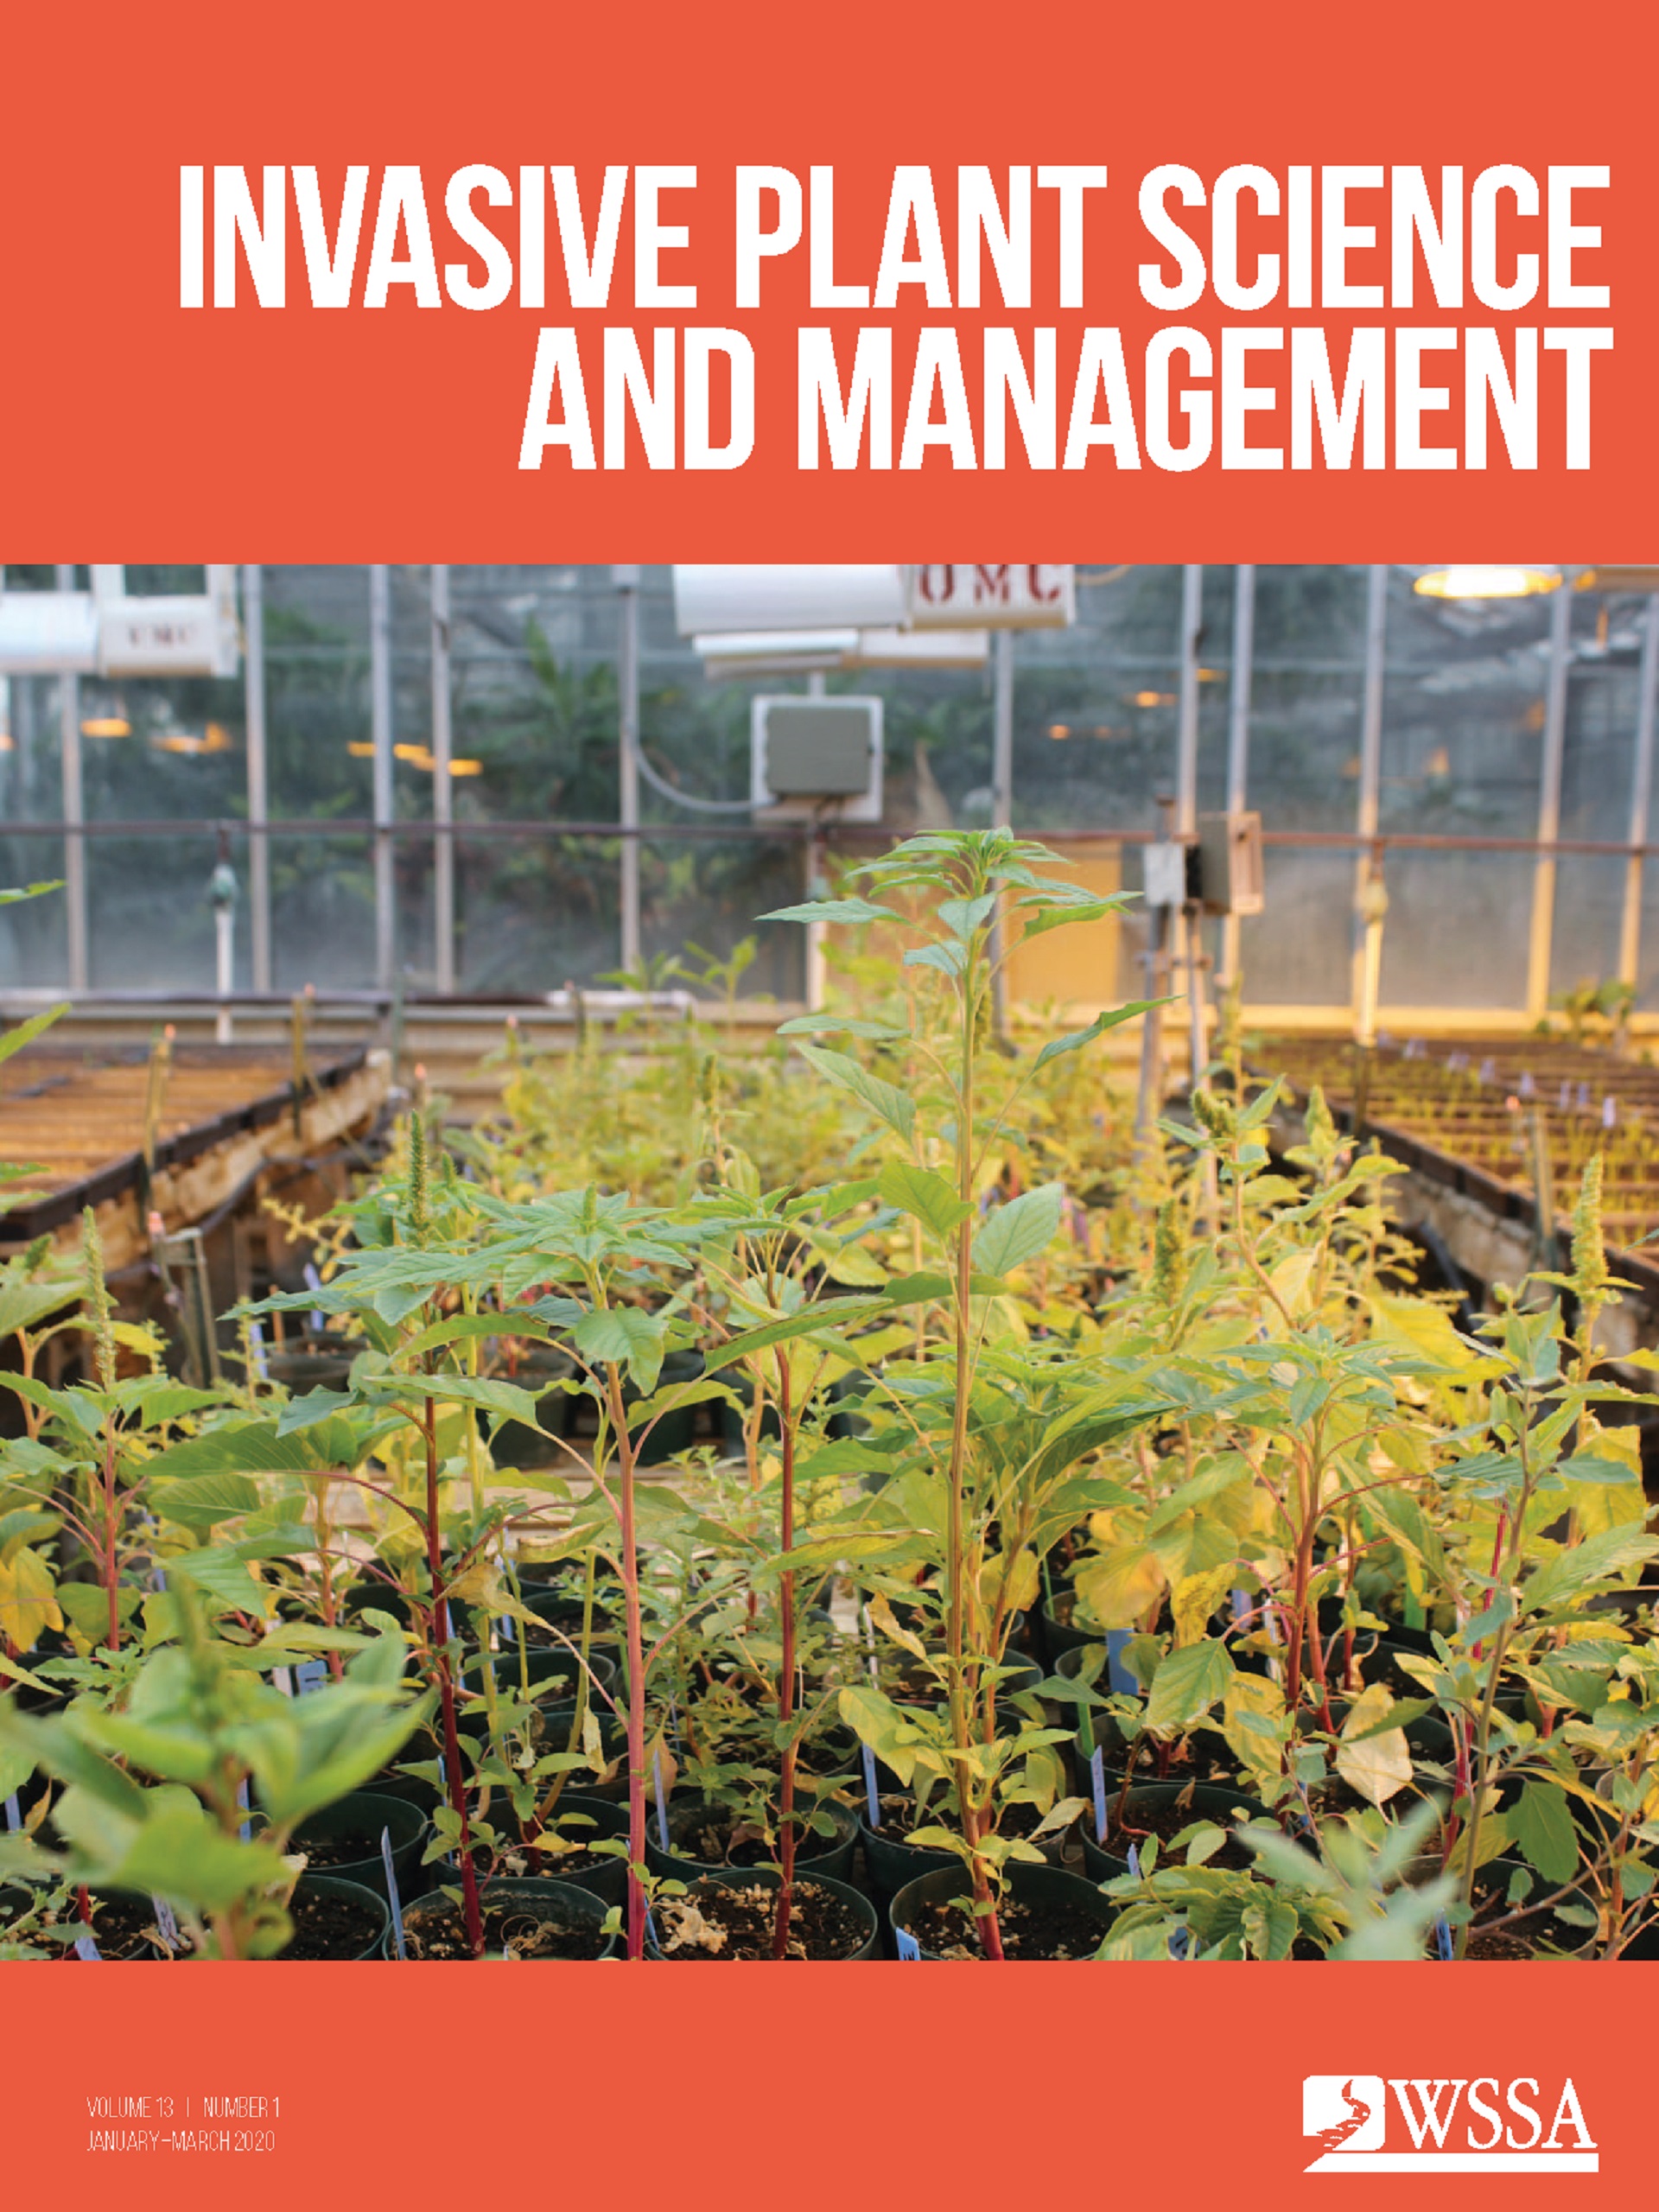 Invasive Plant Science and Management | Latest issue | Cambridge Core